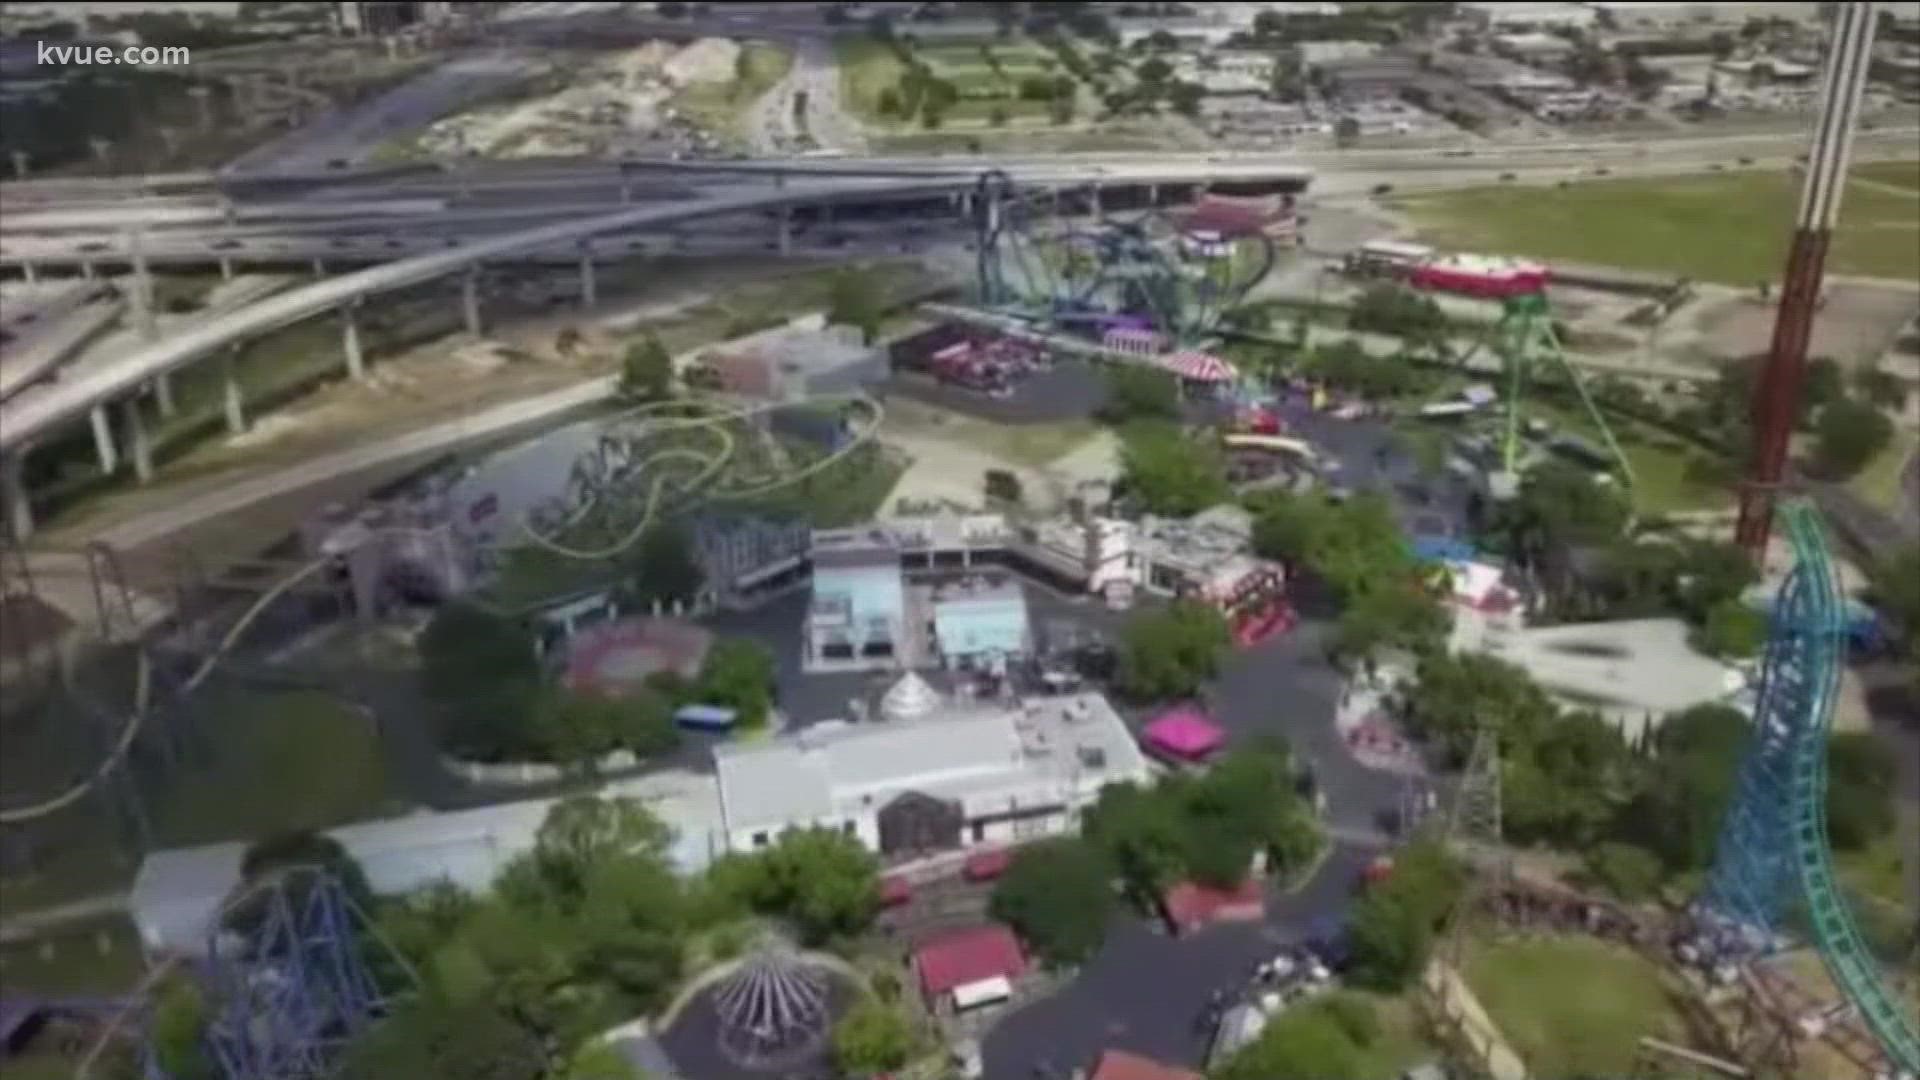 The Six Flags Over Texas amusement park was originally slated to be demolished to make way for an industrial development.